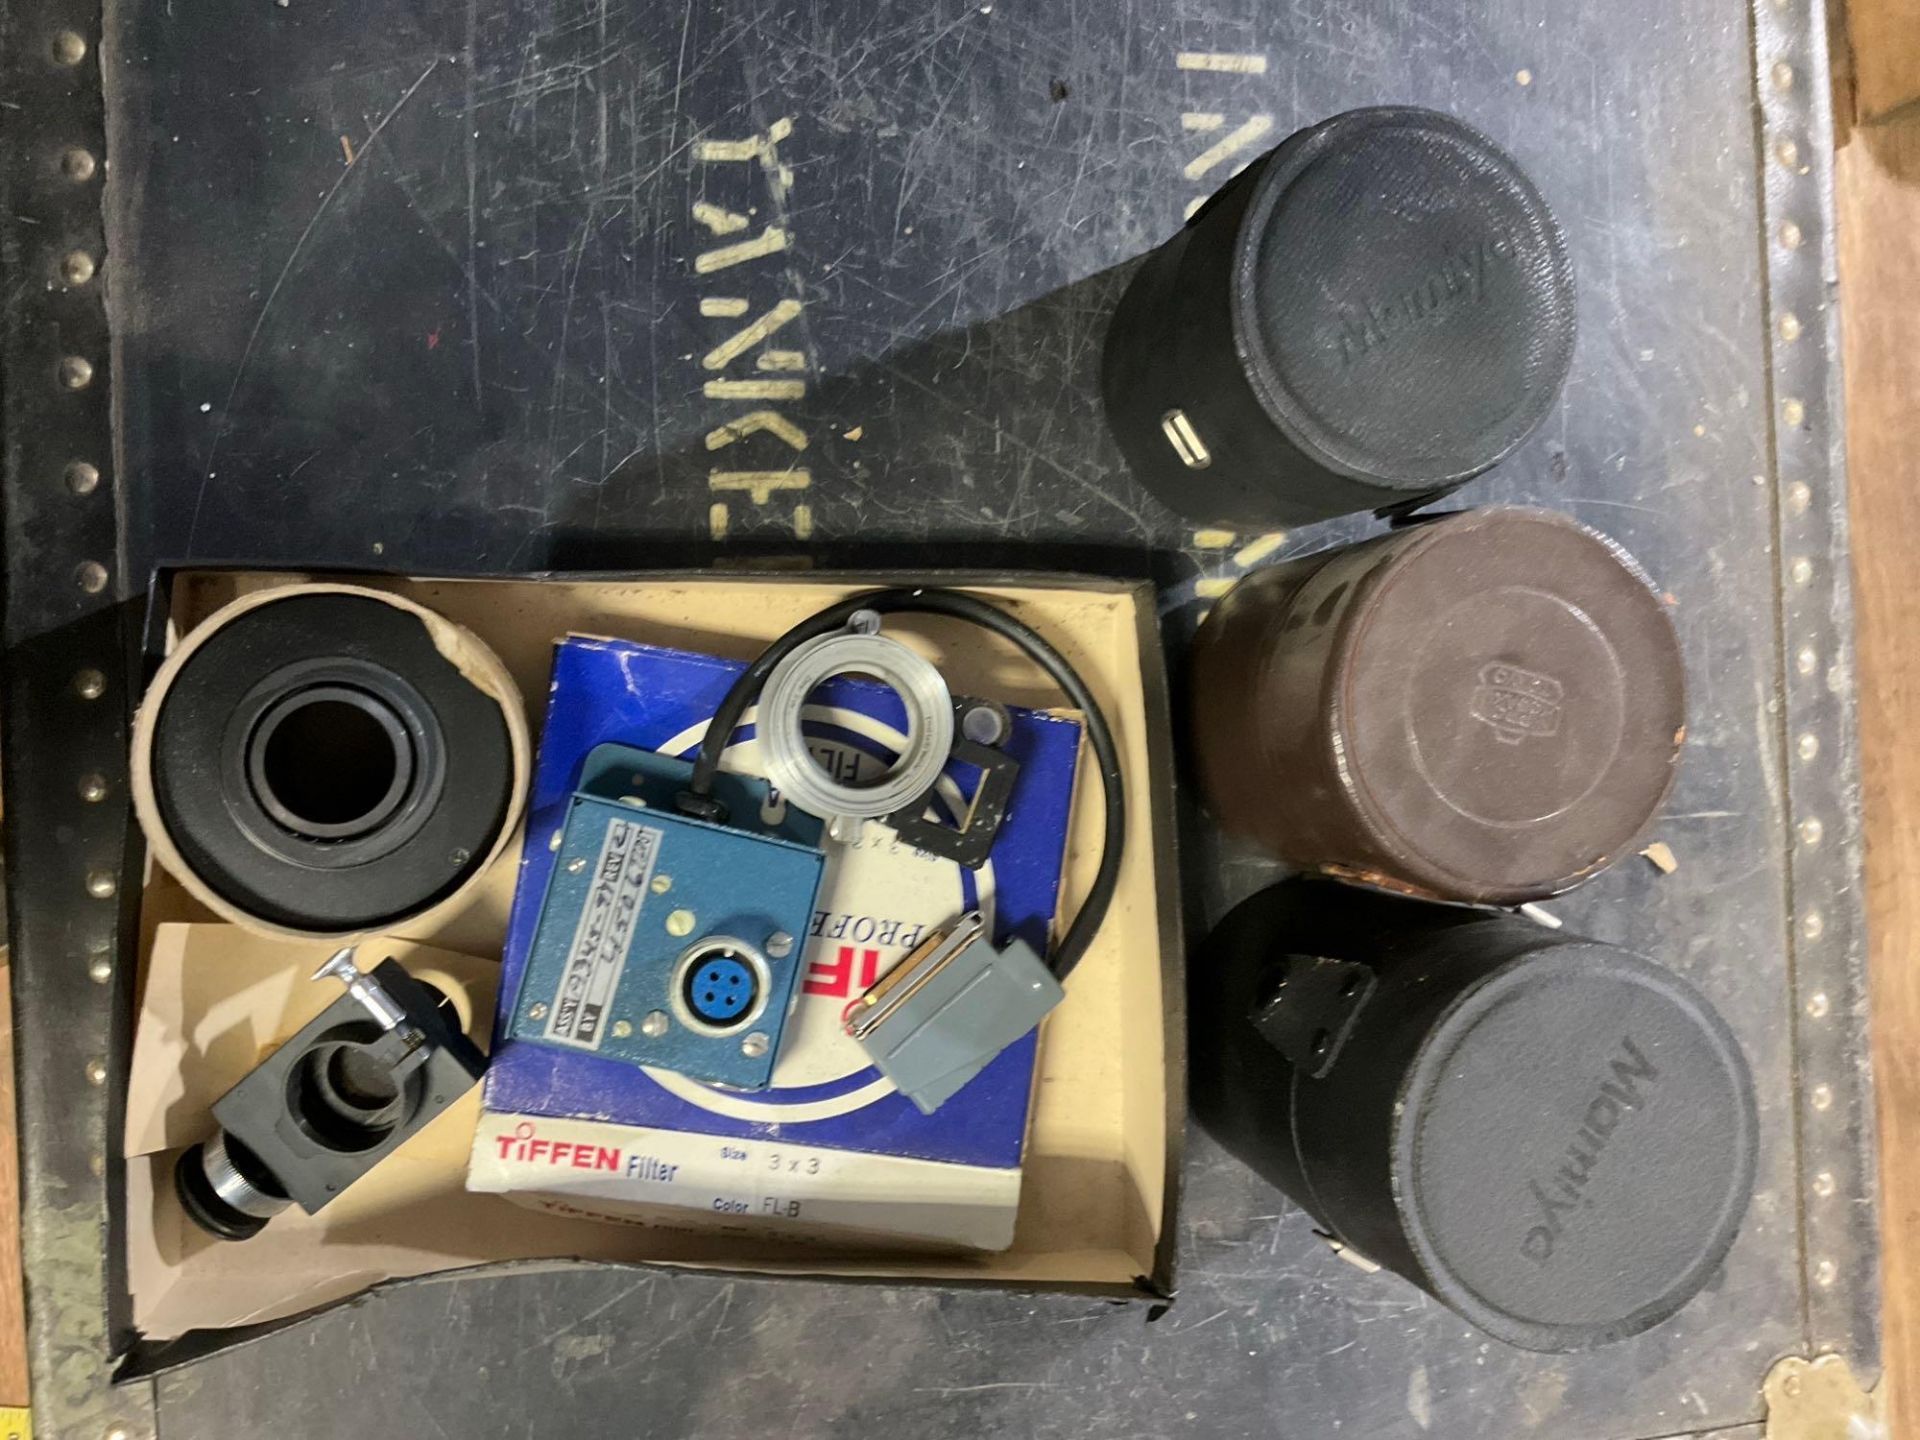 LOT OF LETIZ , POLAROID, PHOTOGRAPHIC AND MICROSCOPIC LENSES WITH EQUIPMENT - Image 7 of 11